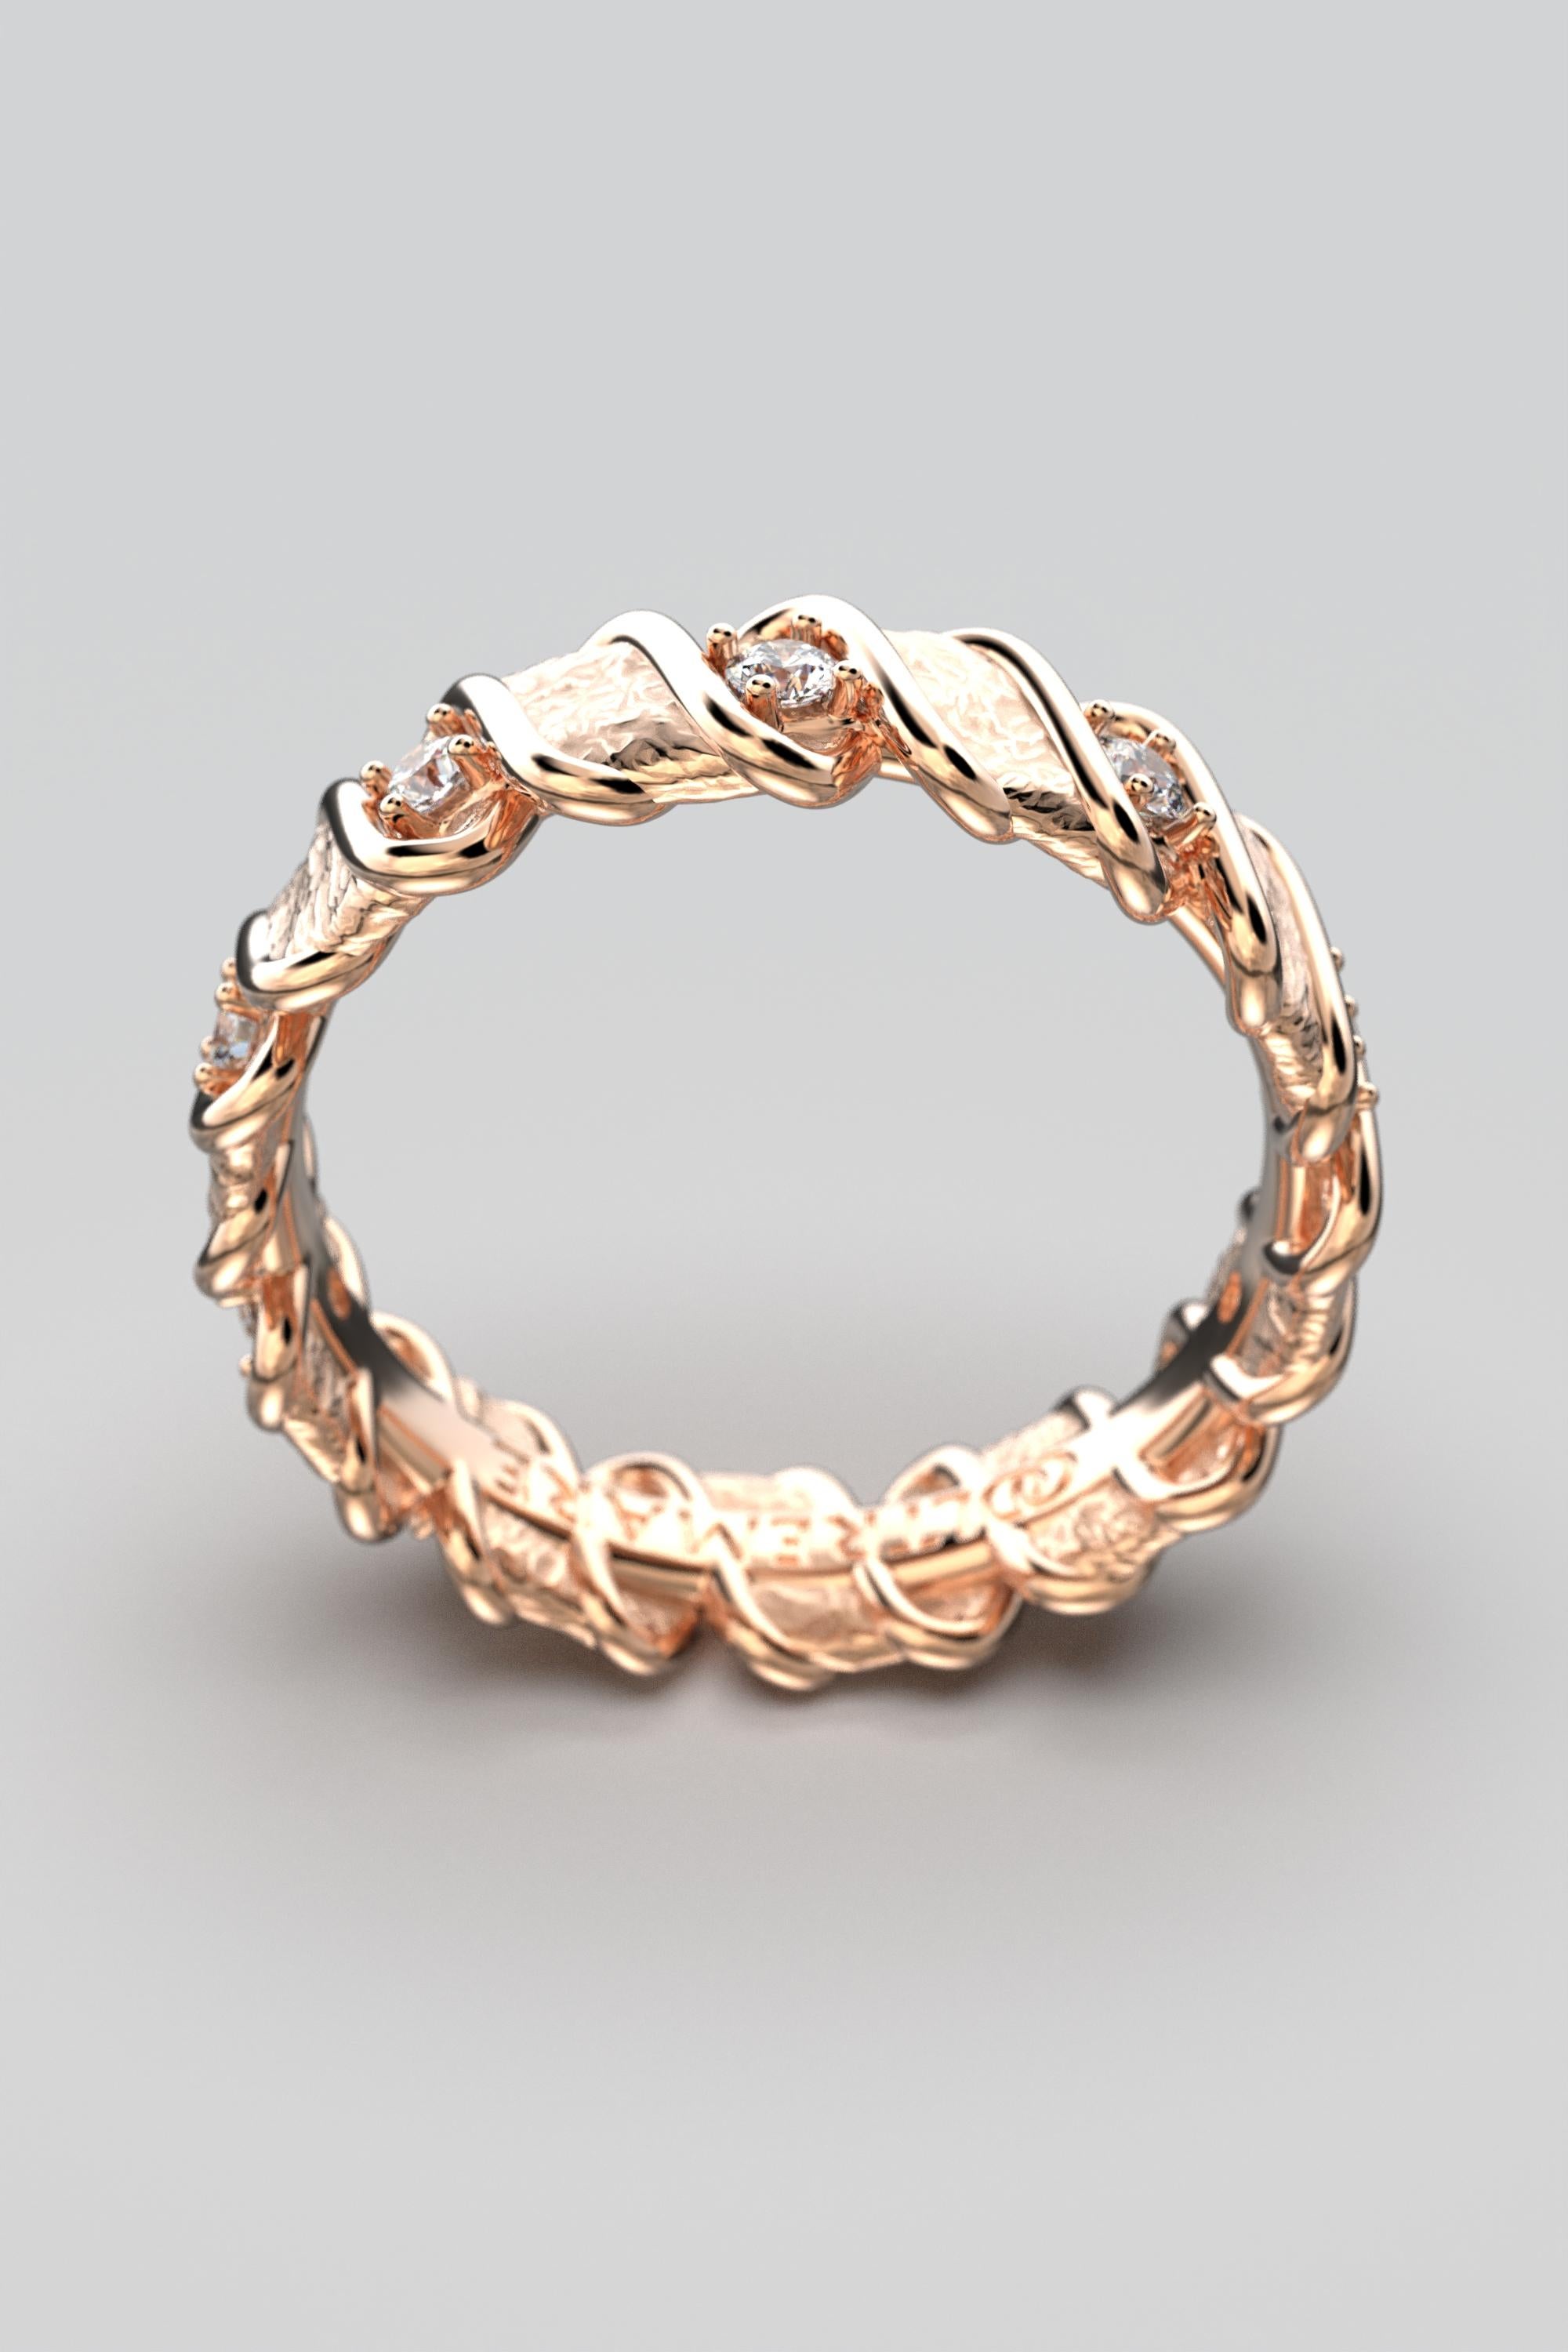 For Sale:  Italian Diamond Eternity Gold Band Made in Italy in 18k By Oltremare Gioielli 6